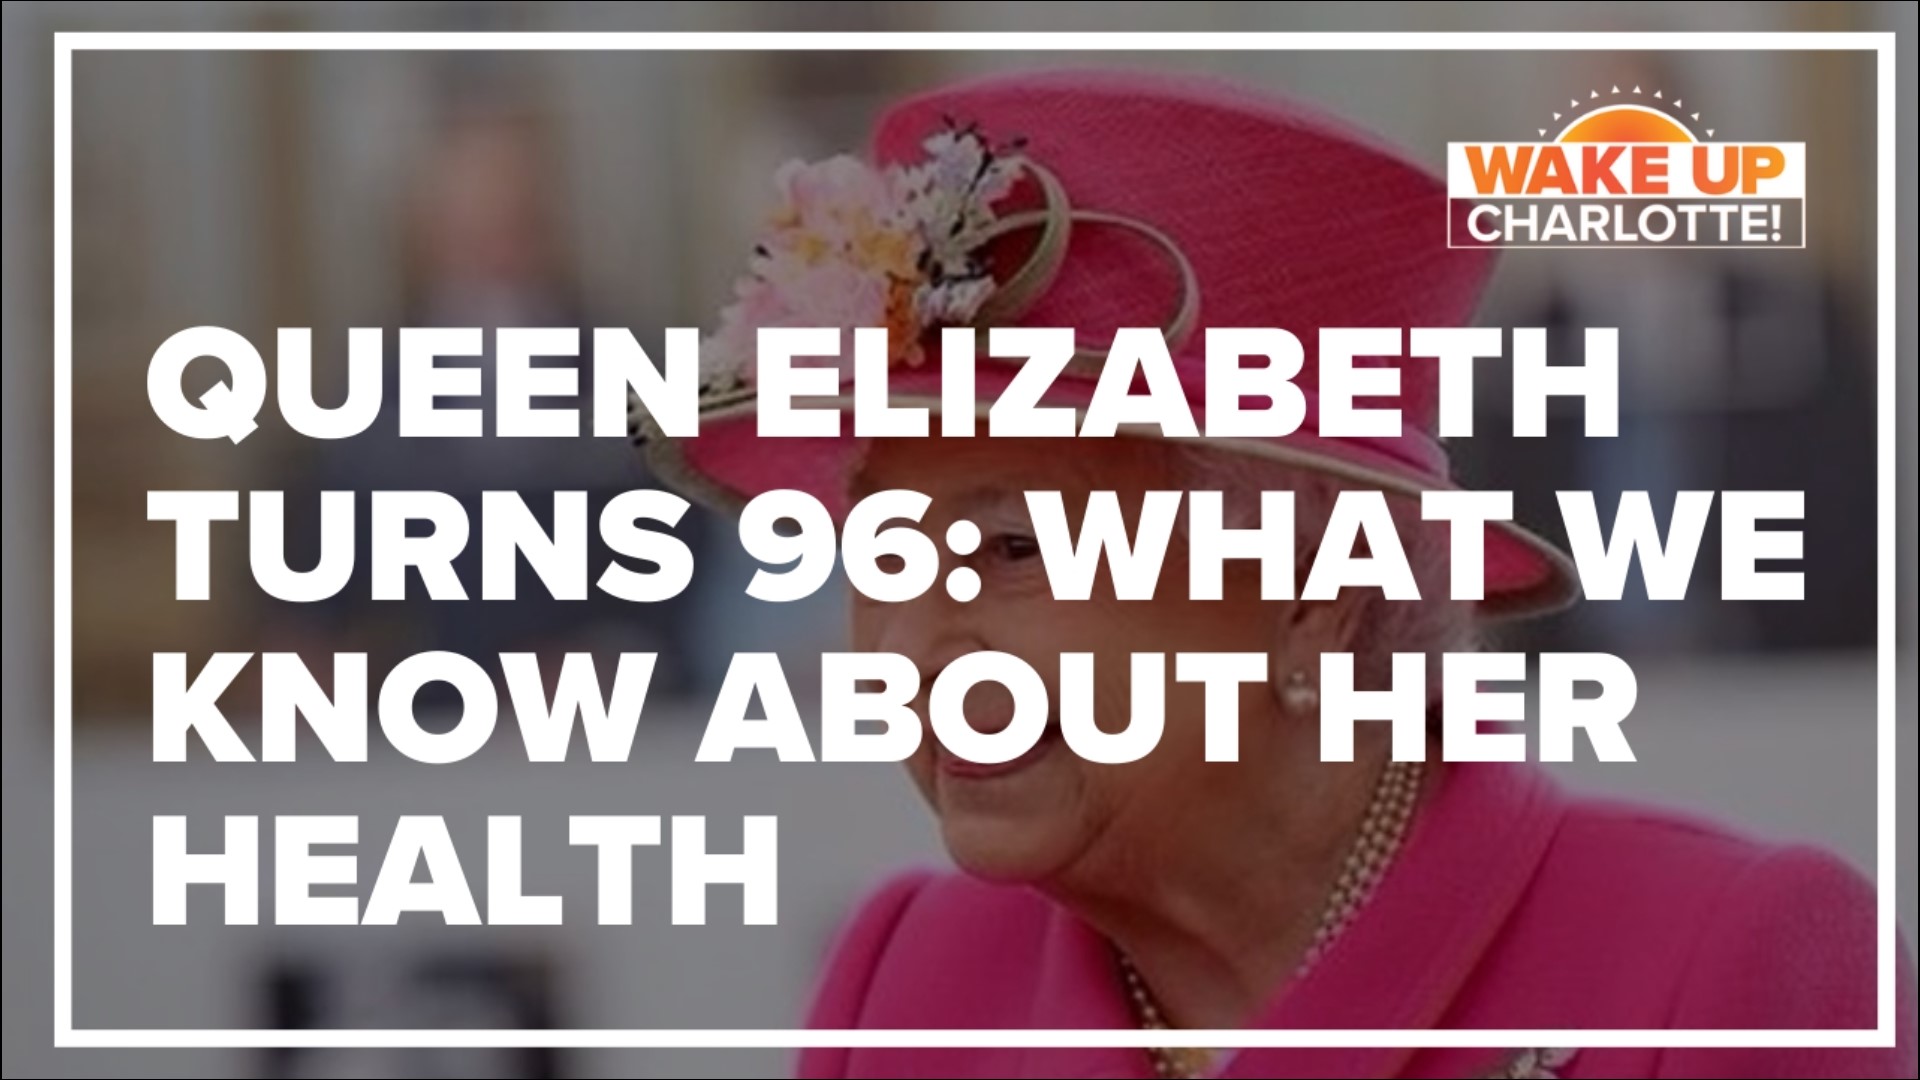 It was back in February when Queen Elizabeth tested positive for COVID-19, giving way to speculations about the royal's health.